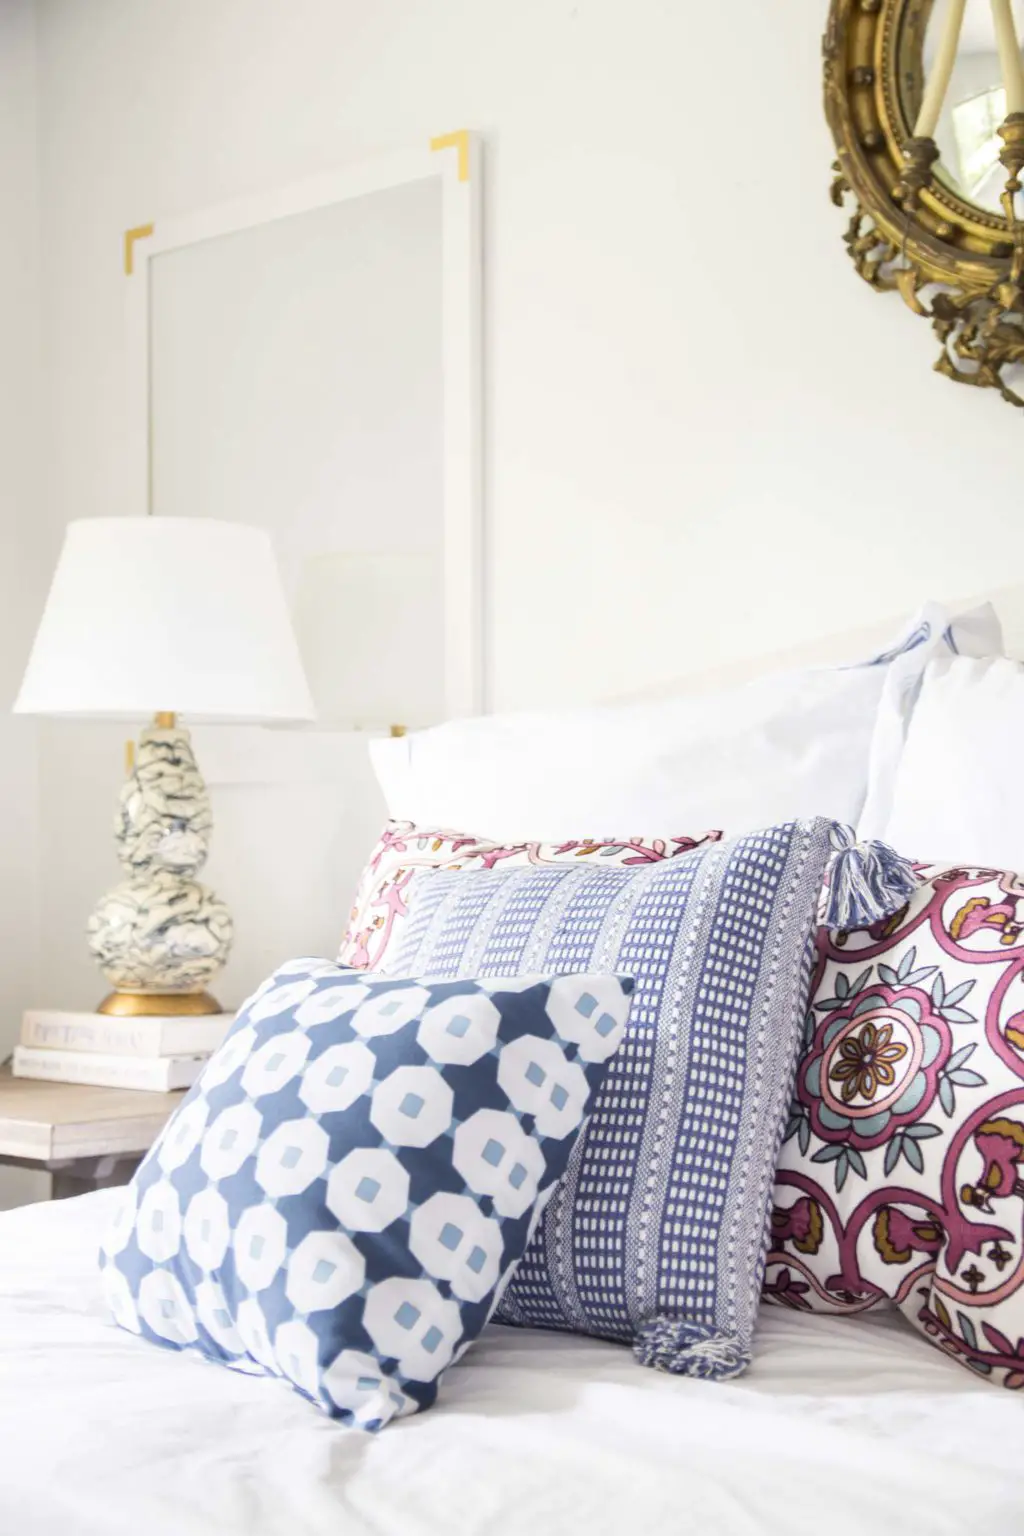 Colorful patterned throw pillows on the bed in a simple white bedroom on Thou Swell @thouswellblog